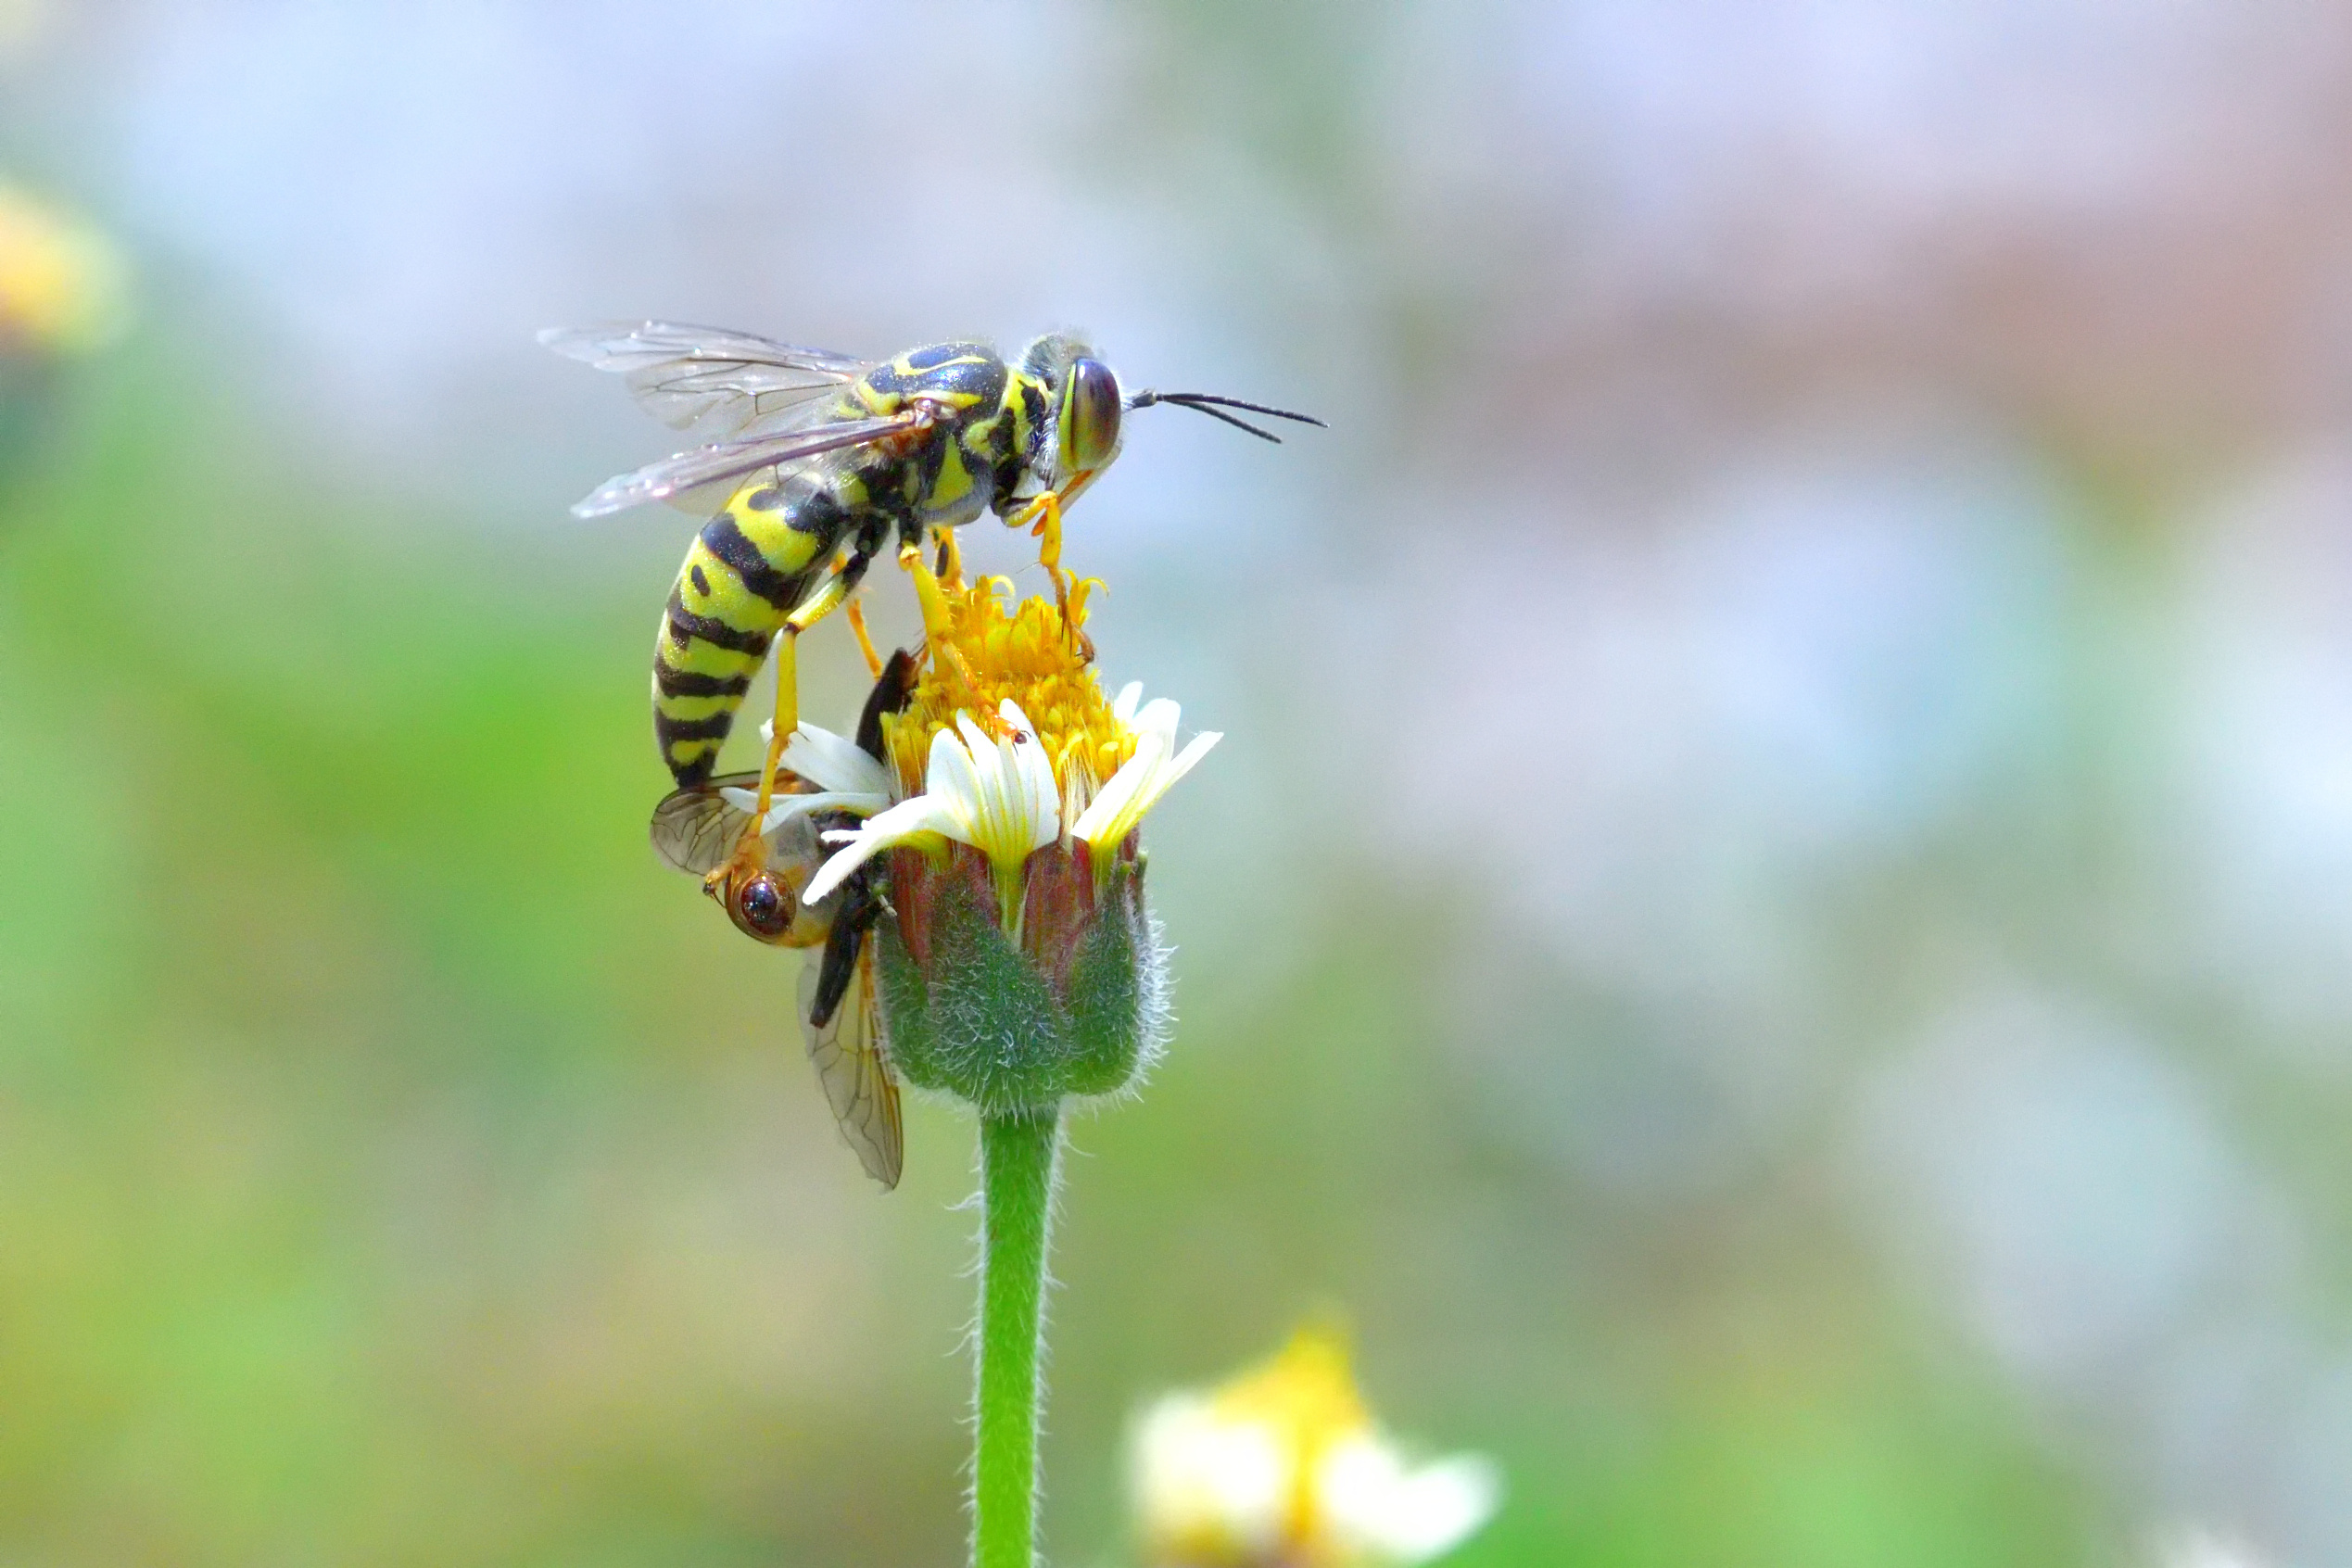 An image of a yellow jacket on a flower - we offer professional yellow jacket removal services in Killeen, TX.